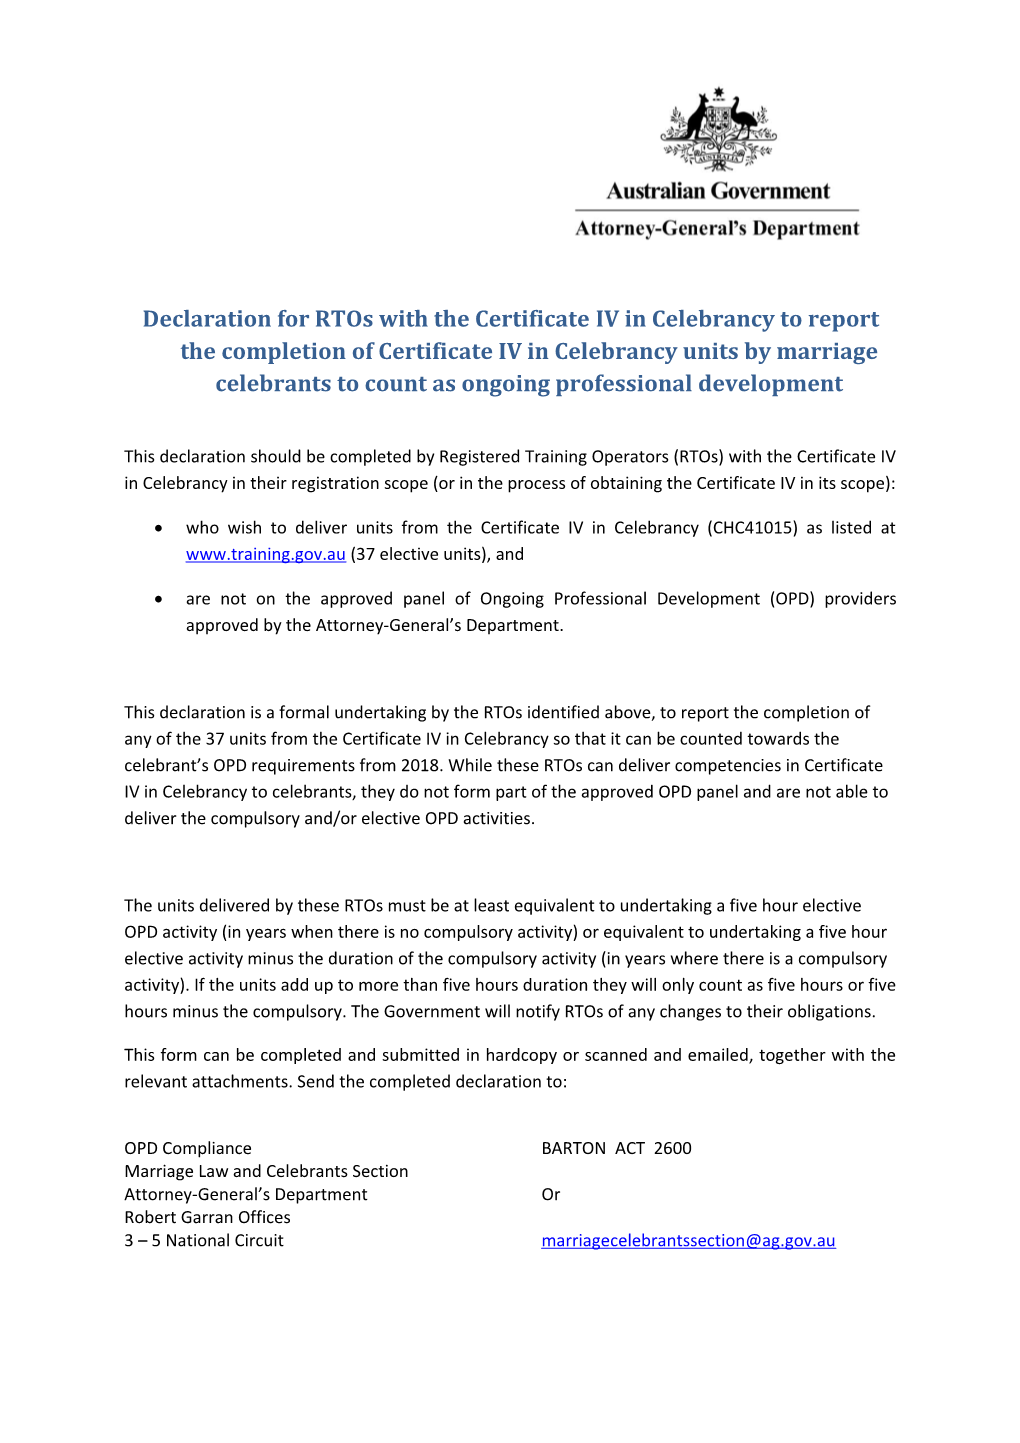 Declaration for Rtos with the Certificate IV in Celebrancy to Report the Completion Of